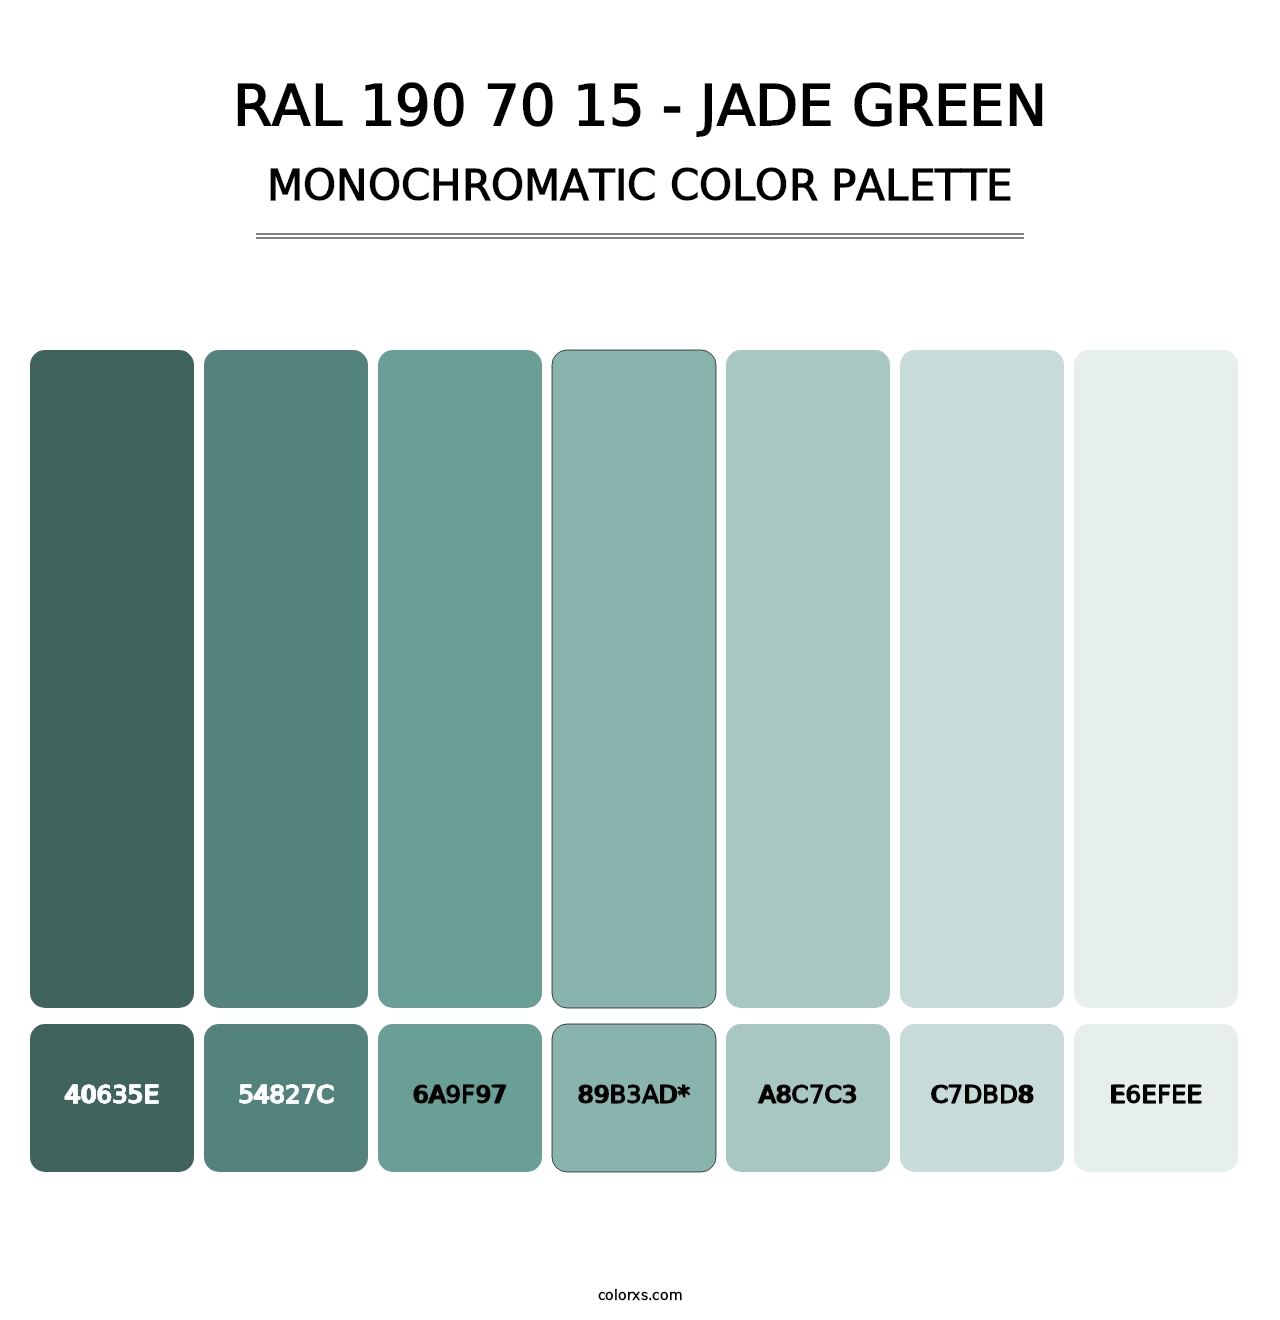 RAL 190 70 15 - Jade Green - Monochromatic Color Palette